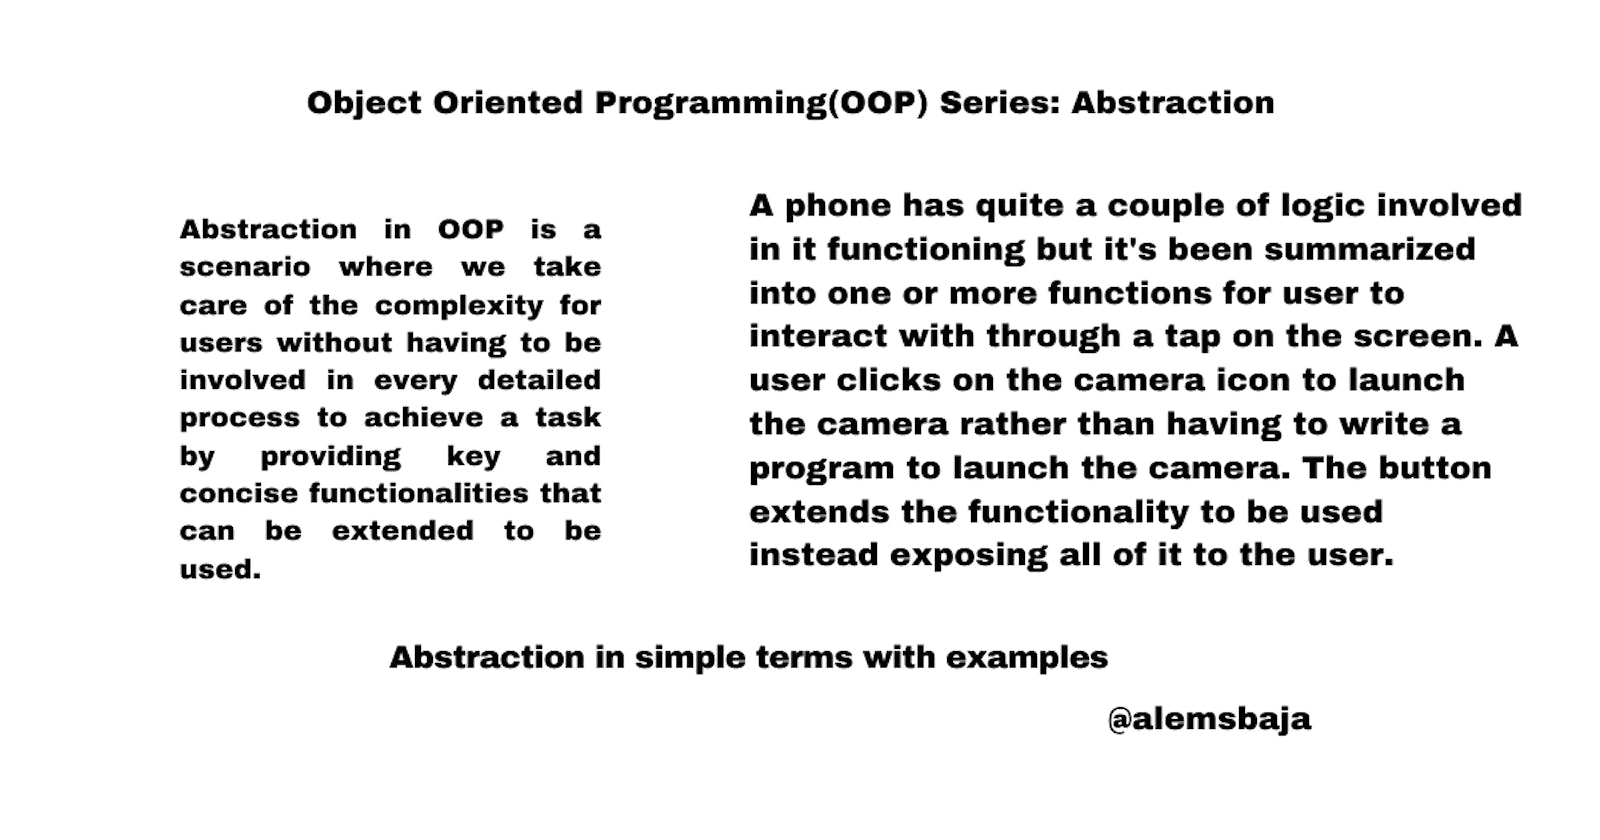 Object Oriented Programming(OOP) Series: Abstraction